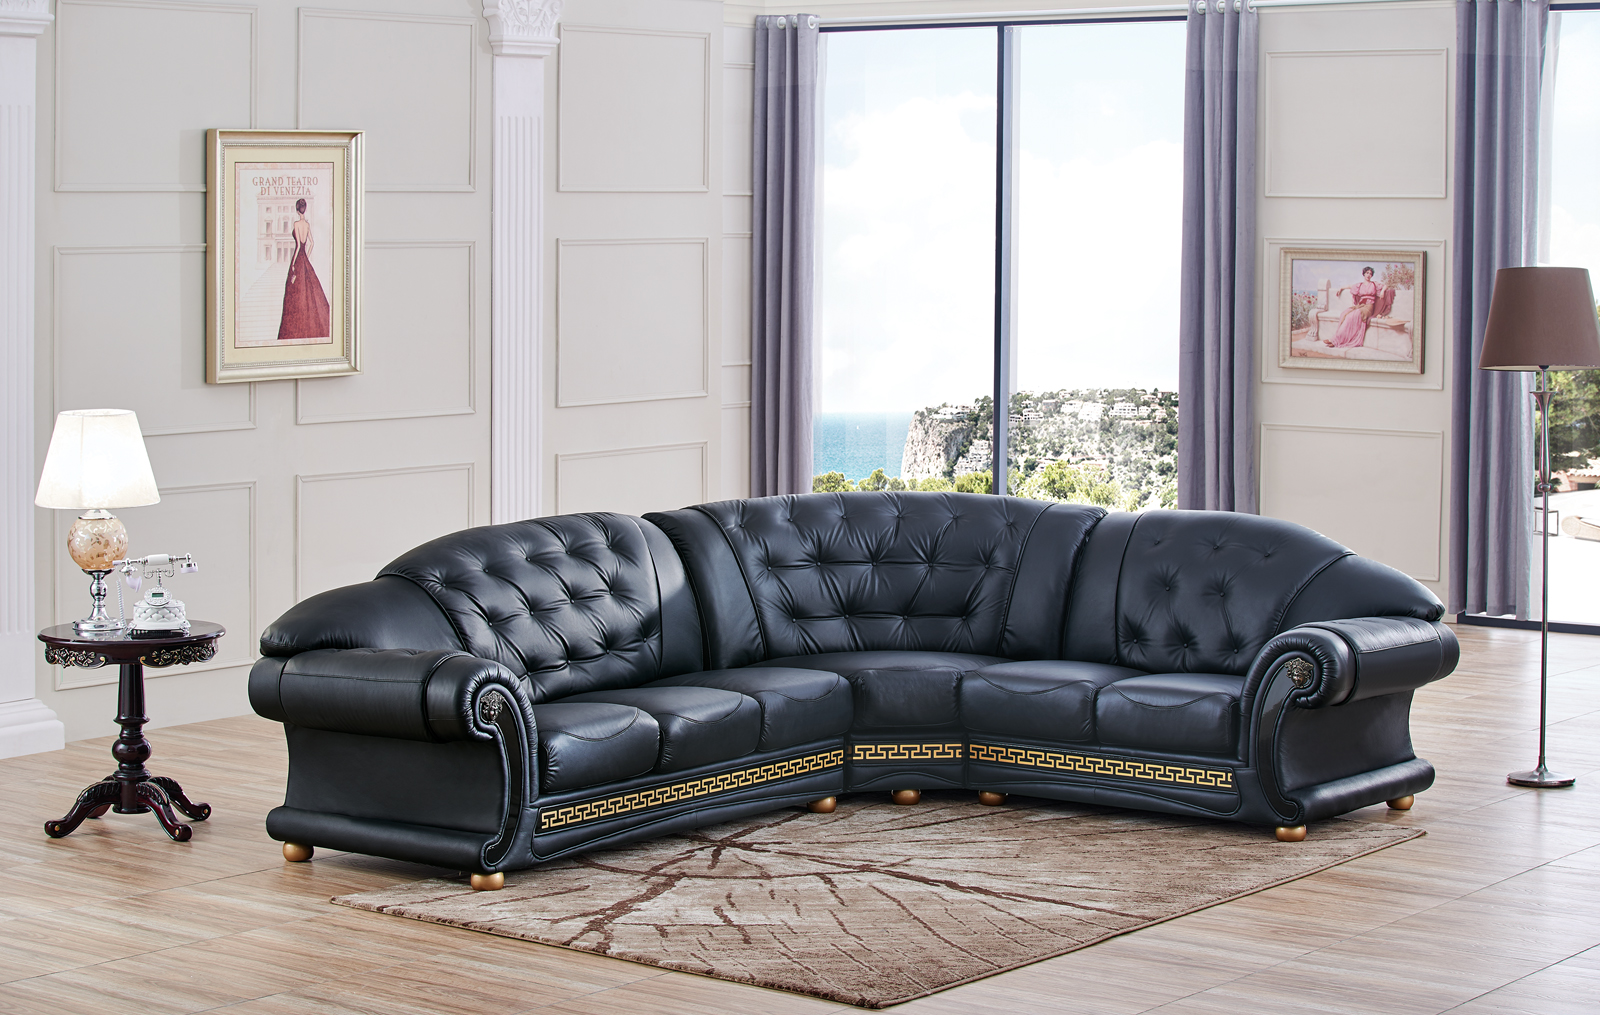 Living Room Furniture Sleepers Sofas Loveseats and Chairs Apolo Sectional Black